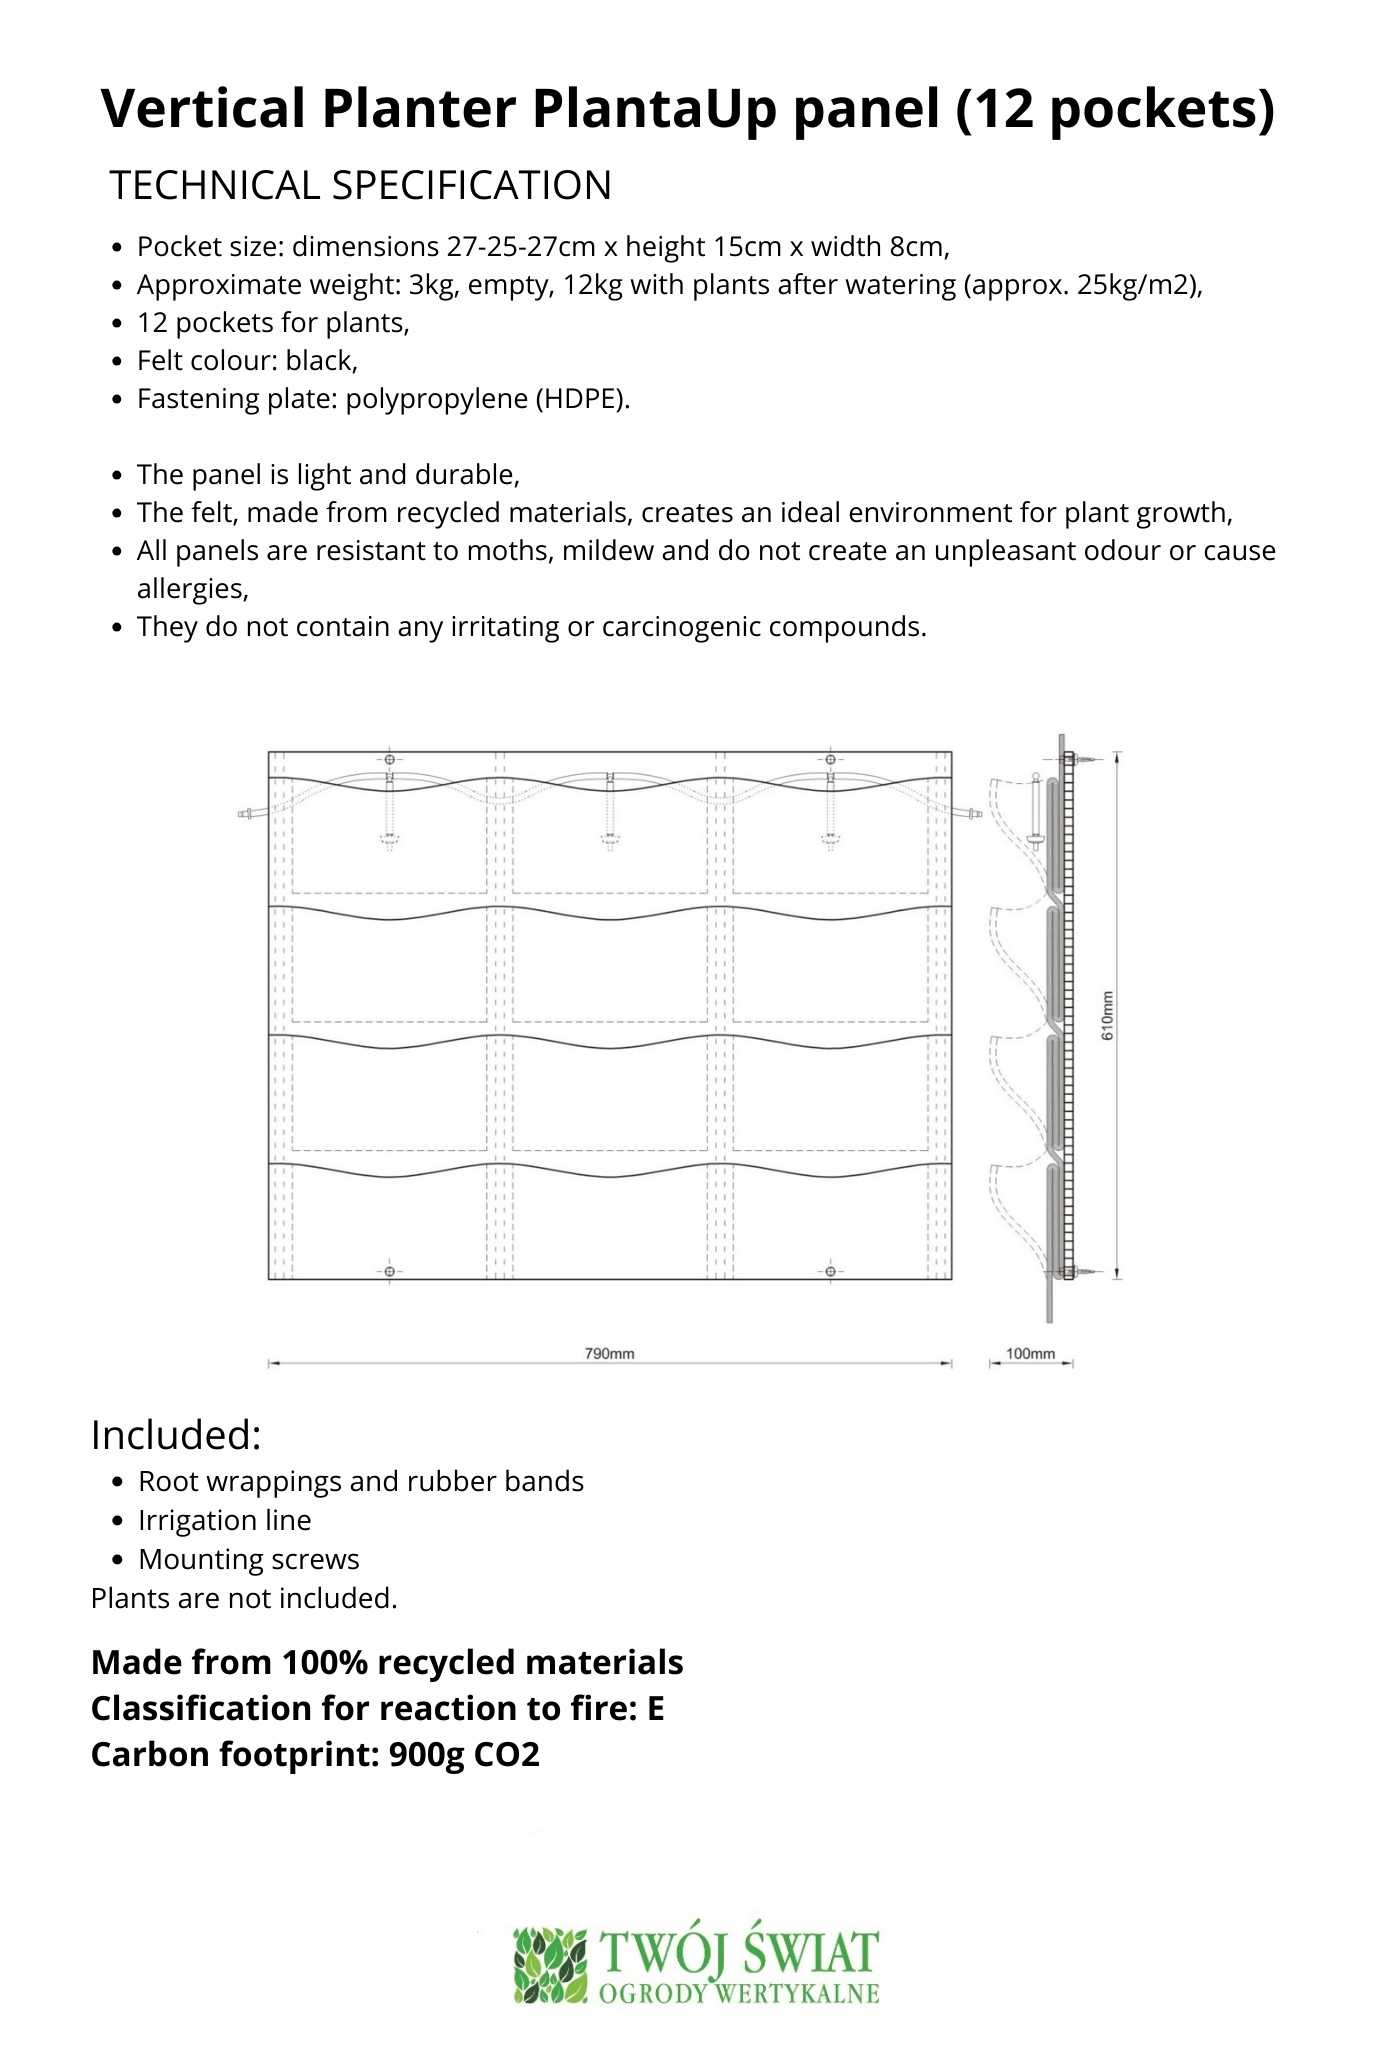 12 pockets Vertical Planter PlantaUp panel - technical specification